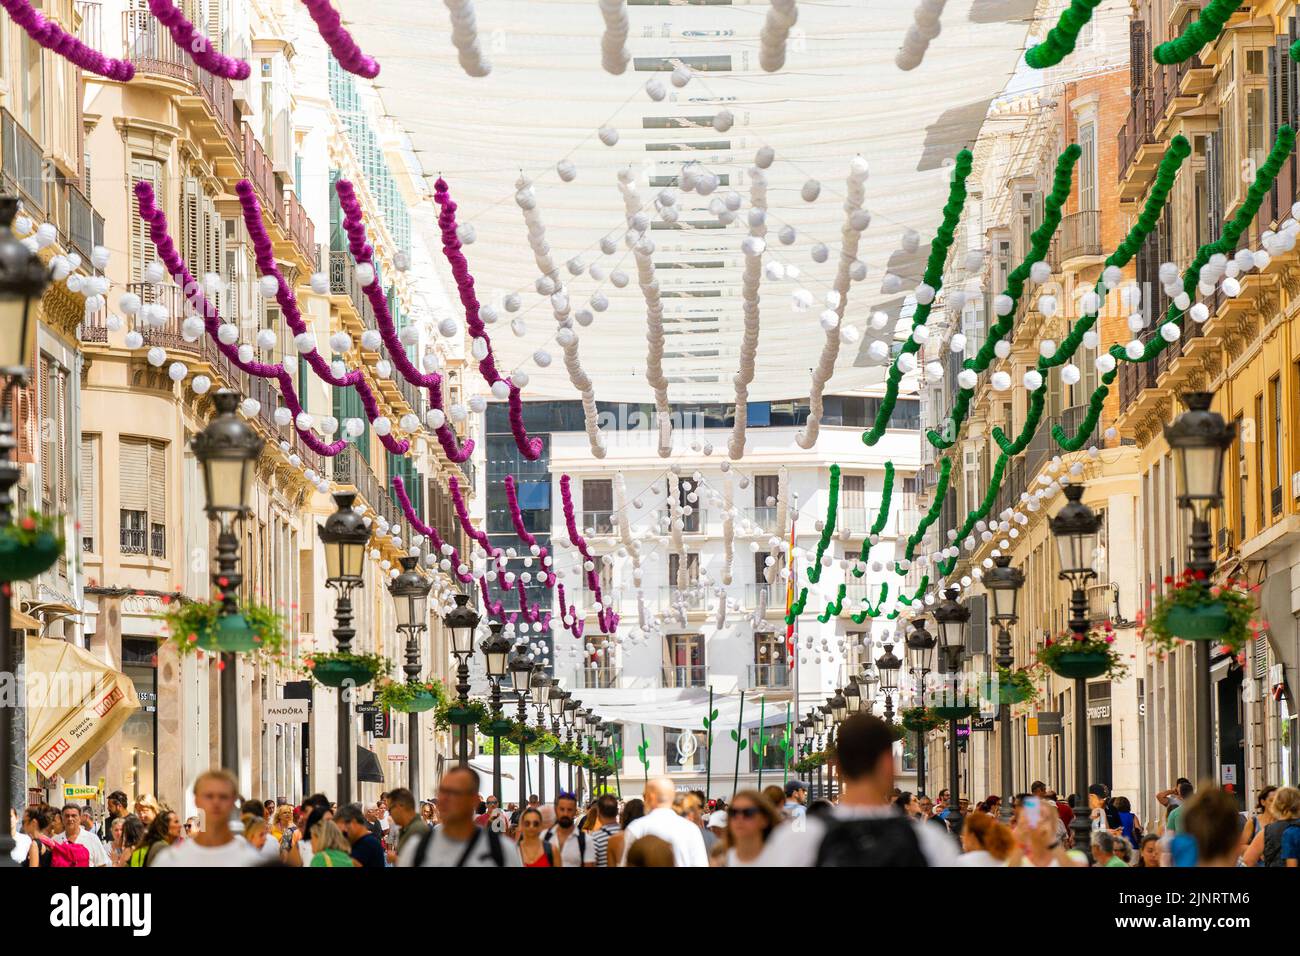 Panoramic view of the Malaga's Fair 2022 decoration installed at Marques de Larios Street. The Fair is being held for the first time since 2019. The 2020 and 2021 editions were suspended due to Covid19 pandemic. Stock Photo